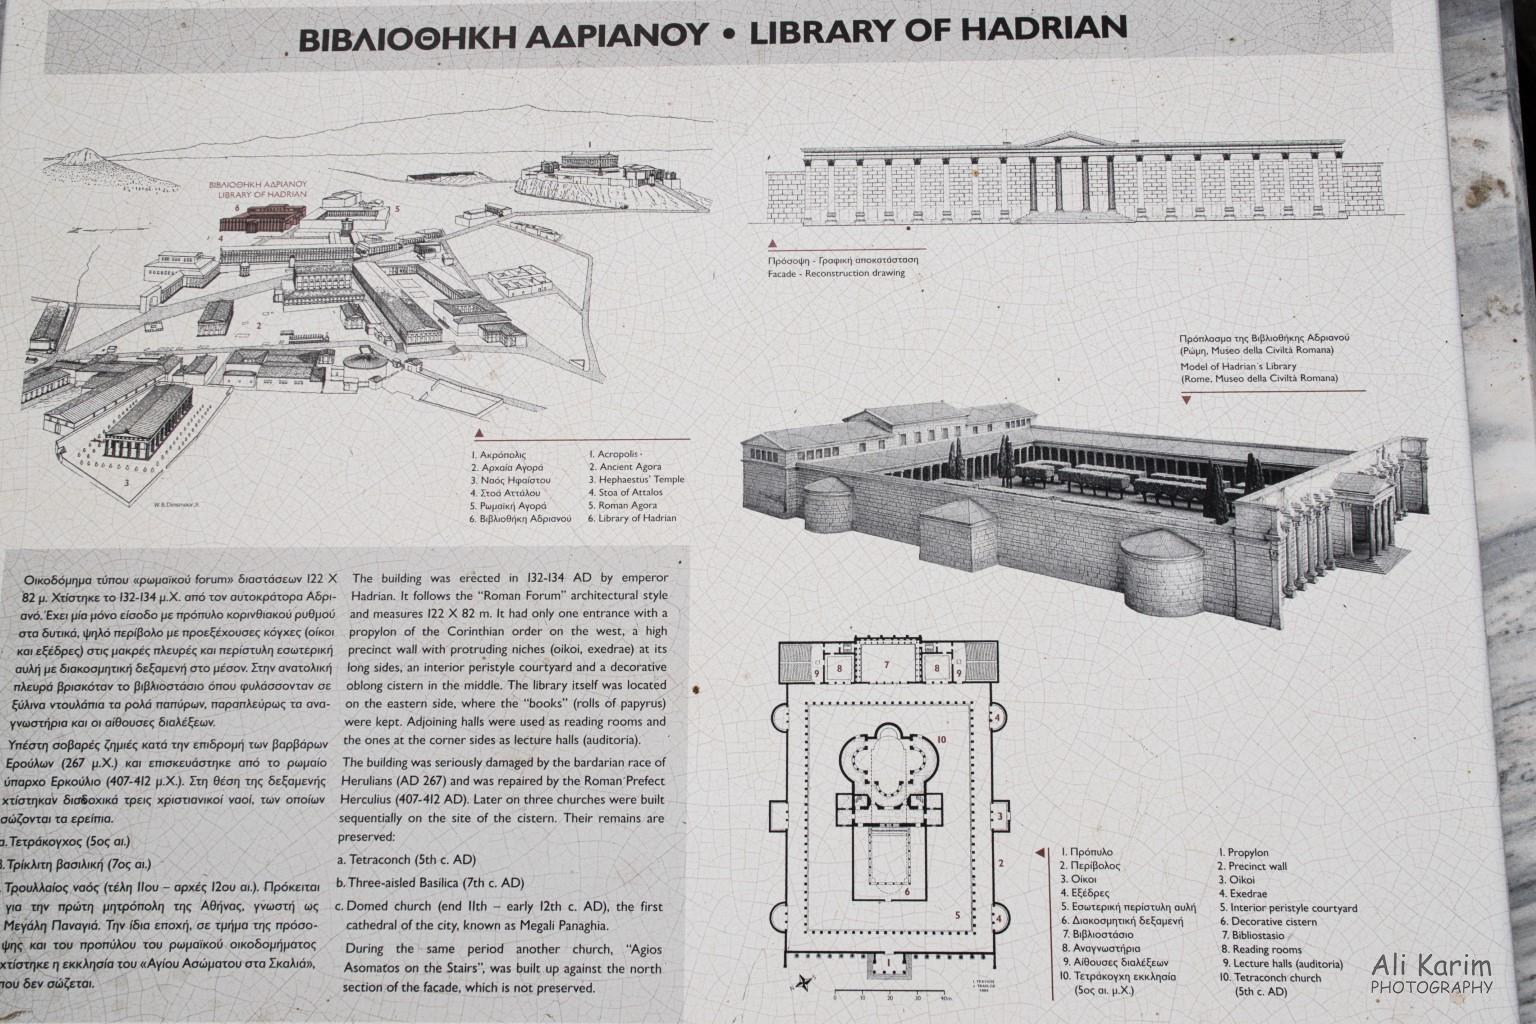 Athens, Greece, June, 2021, About Hadrian’s Library